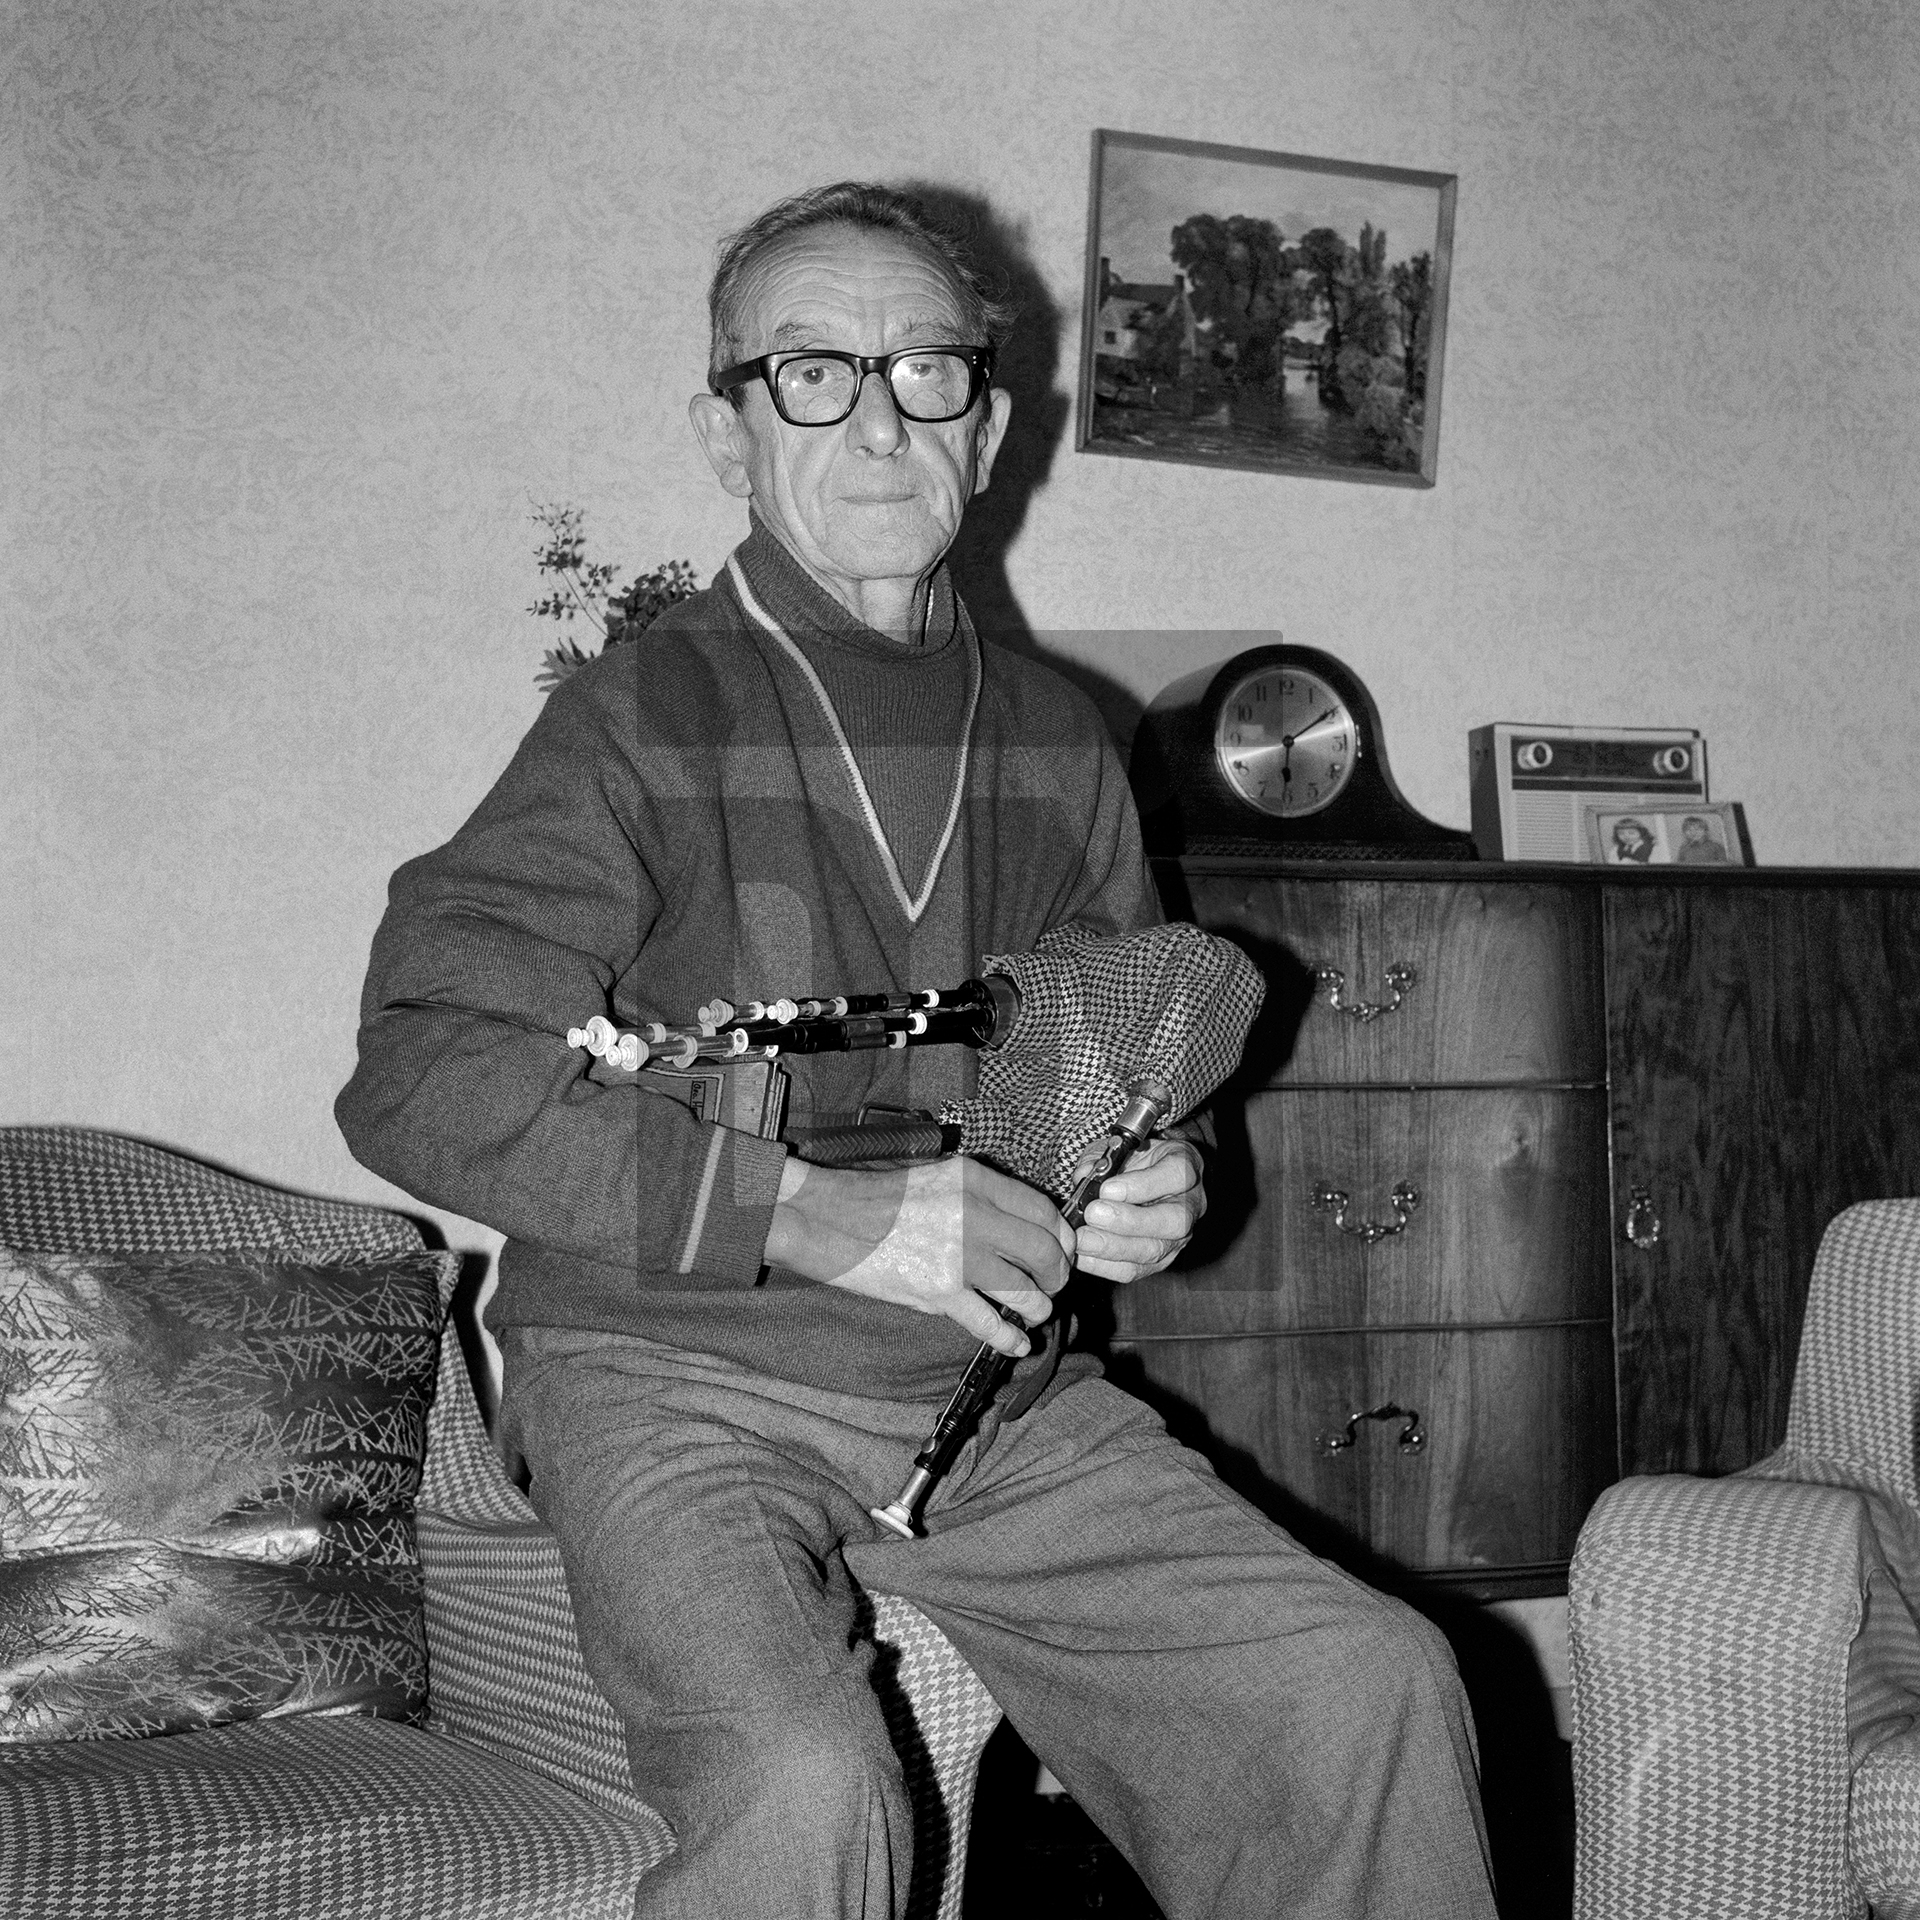 George Hepple, Northumbrian pipes player, Haltwhistle, Cumbria. September 1974 by Daniel Meadows